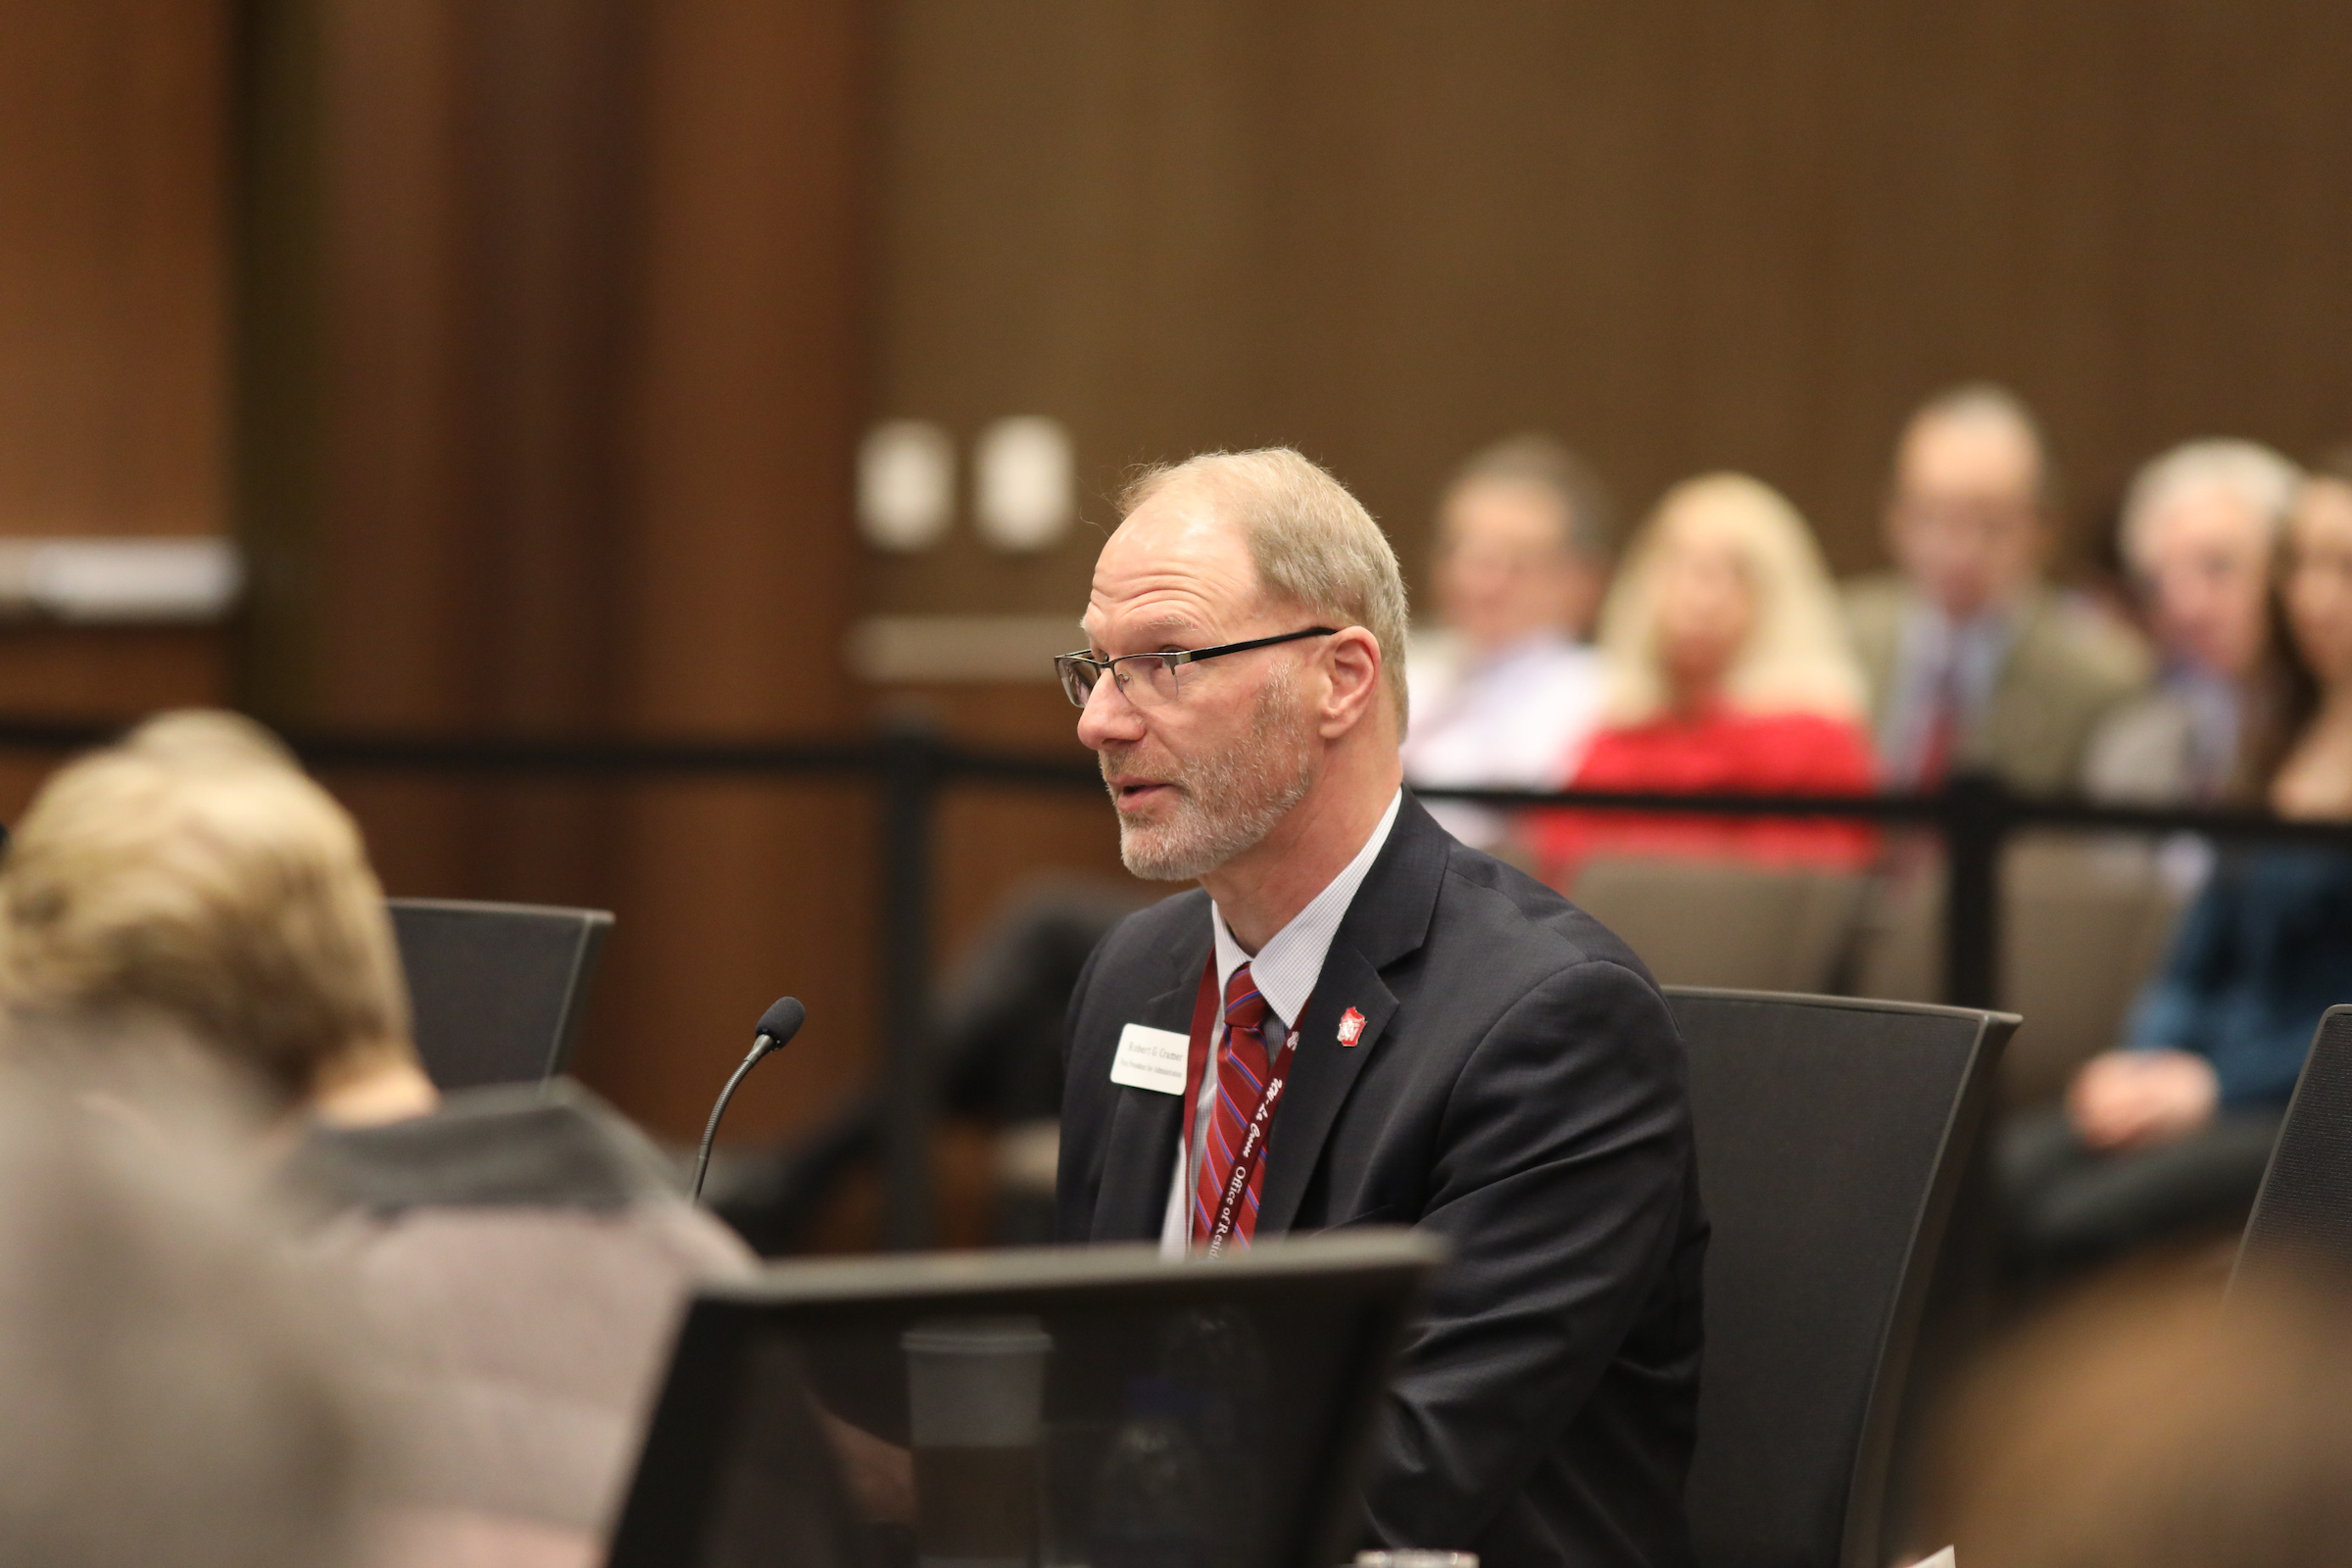 Photo of Rob Cramer, UW System Vice President for Administration, who provided an update on UW System’s Restructuring initiative at the December 7, 2018, Board of Regents meeting hosted by UW-La Crosse